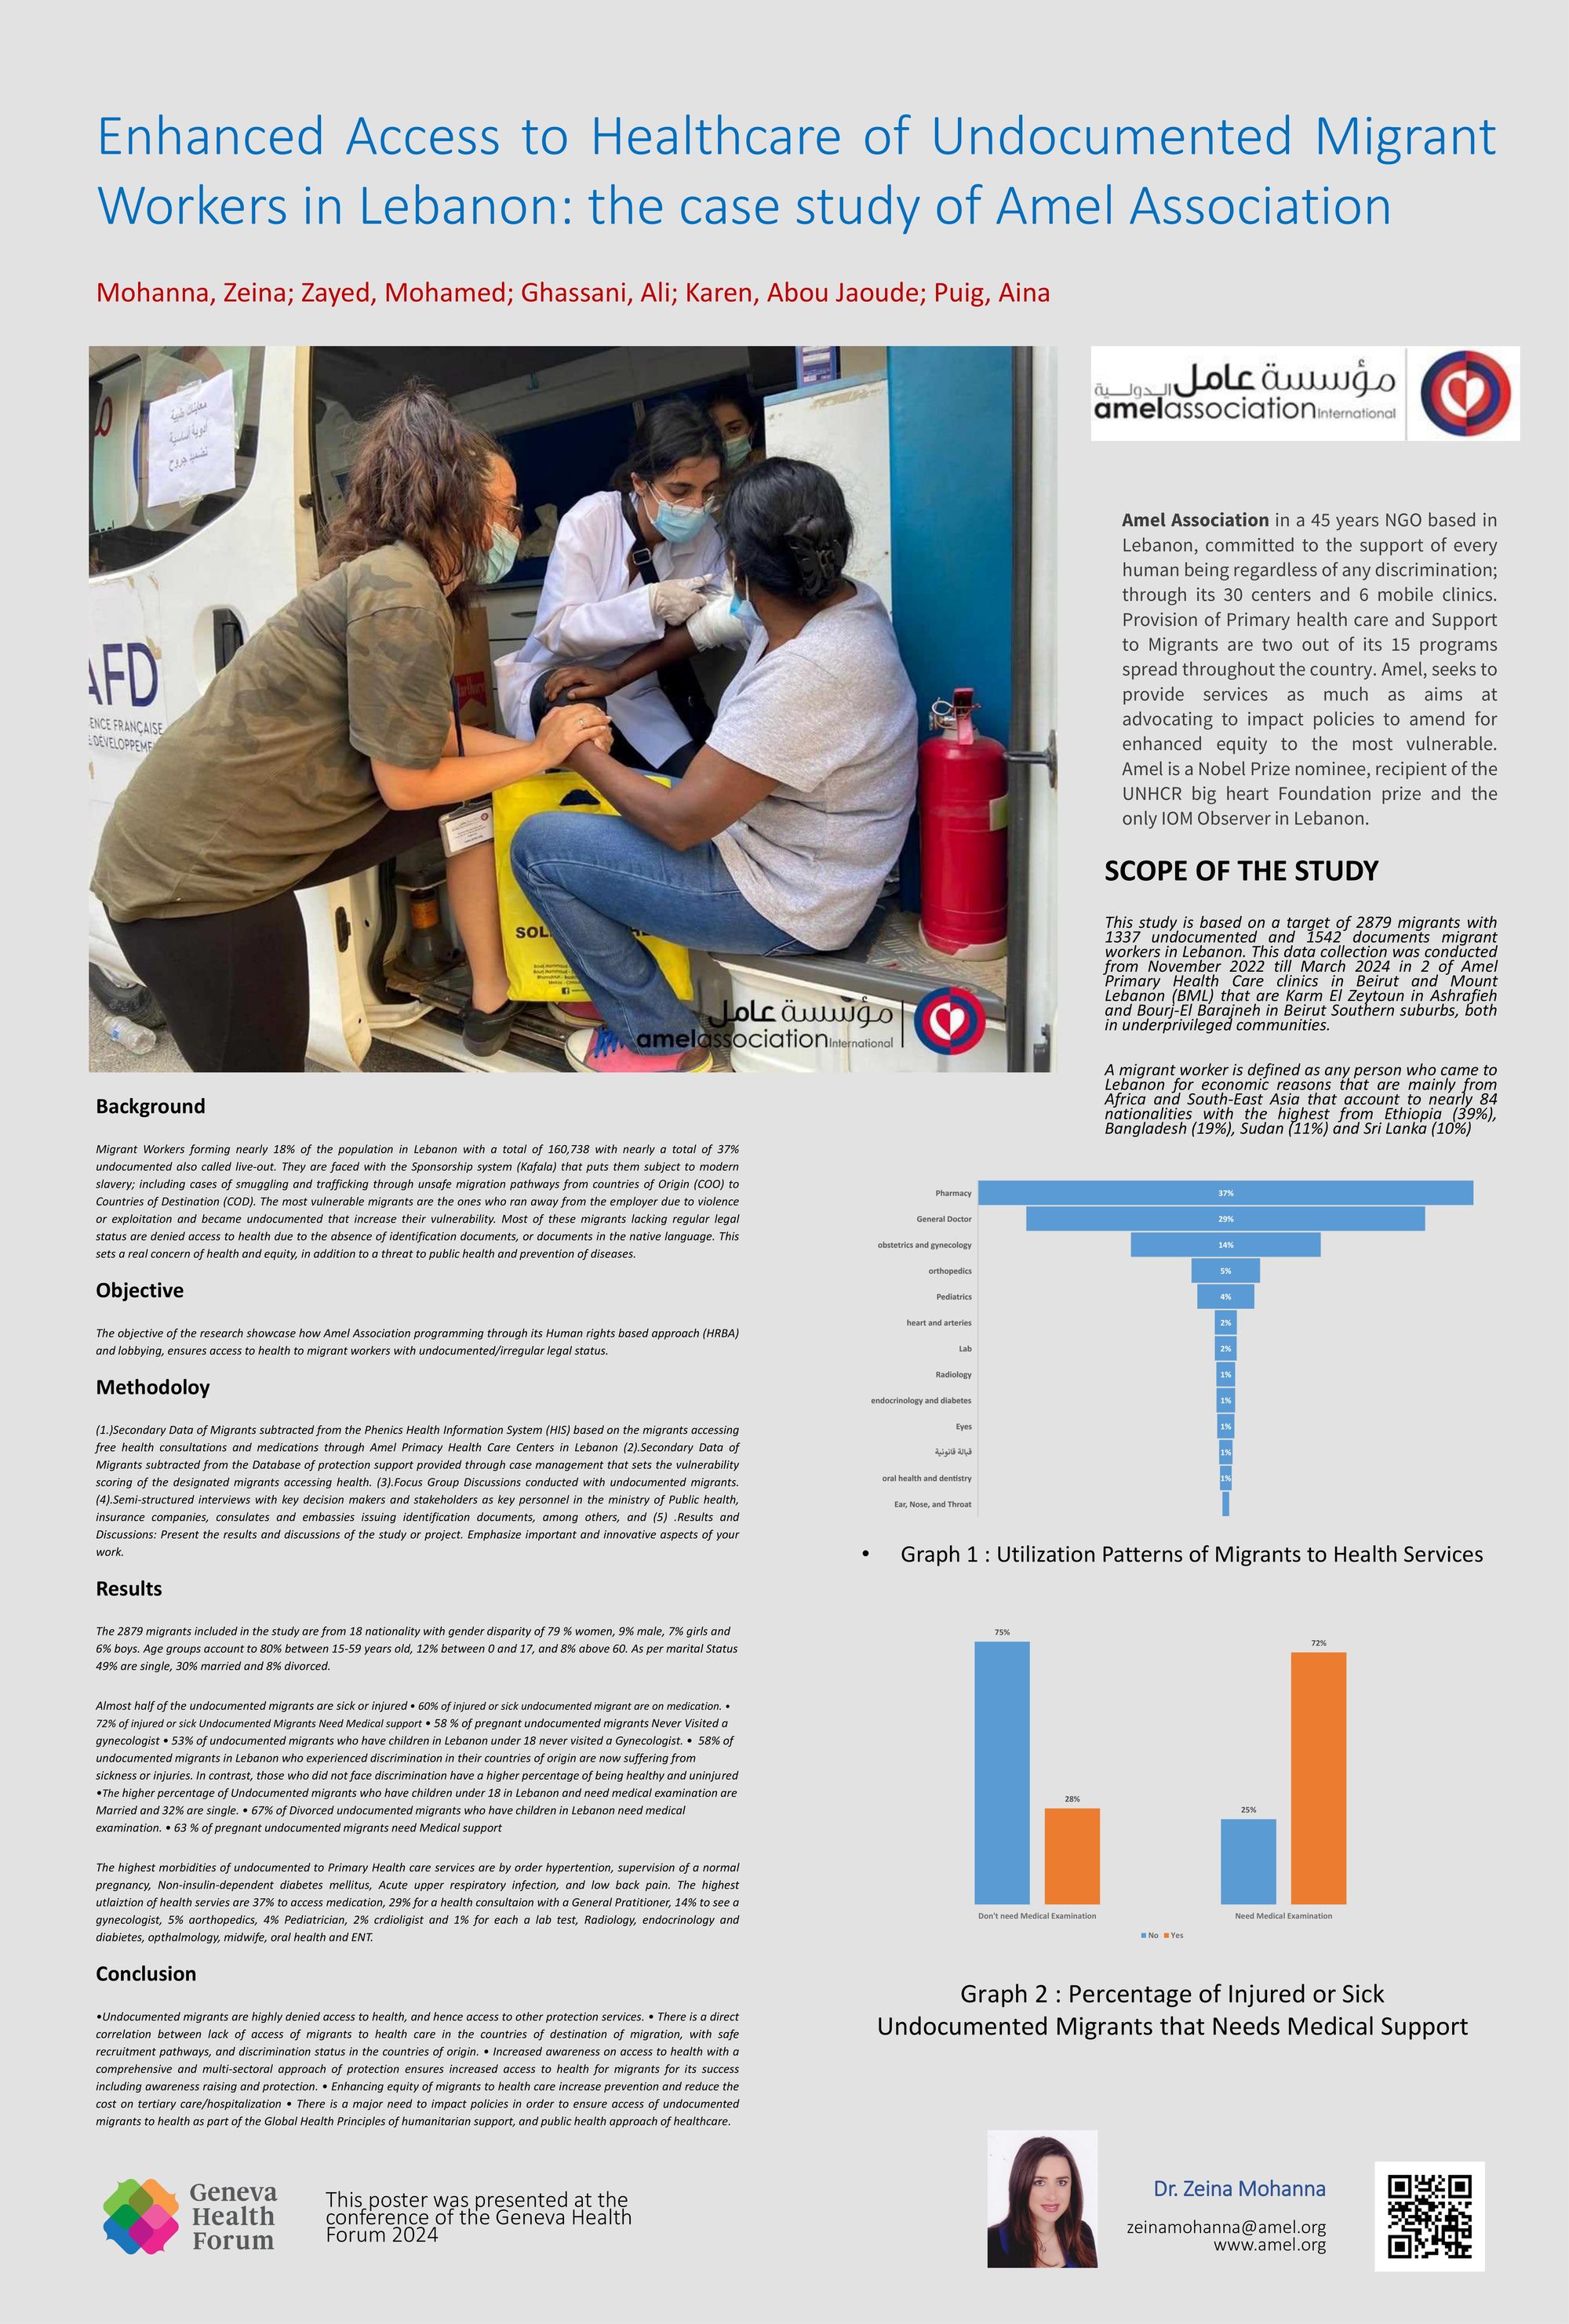 Enhanced Access to healthcare of undocumented Migrant Workers in Lebanon: the case study of Amel Association